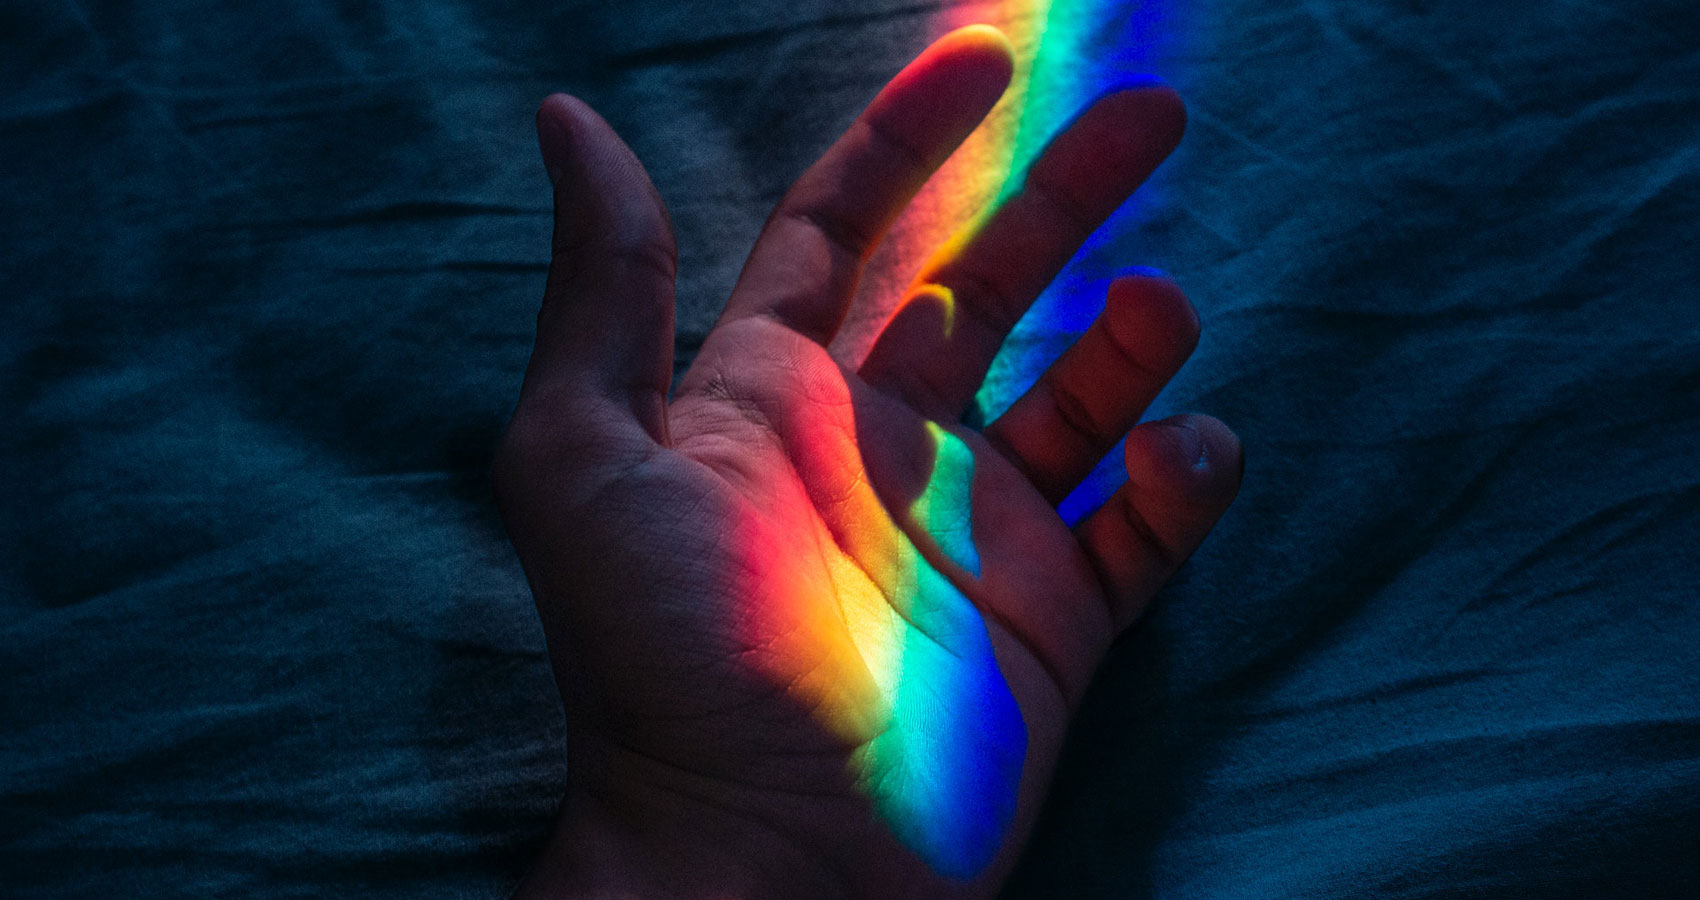 Rainbows, short story written by Richard Prime at Spillwords.com